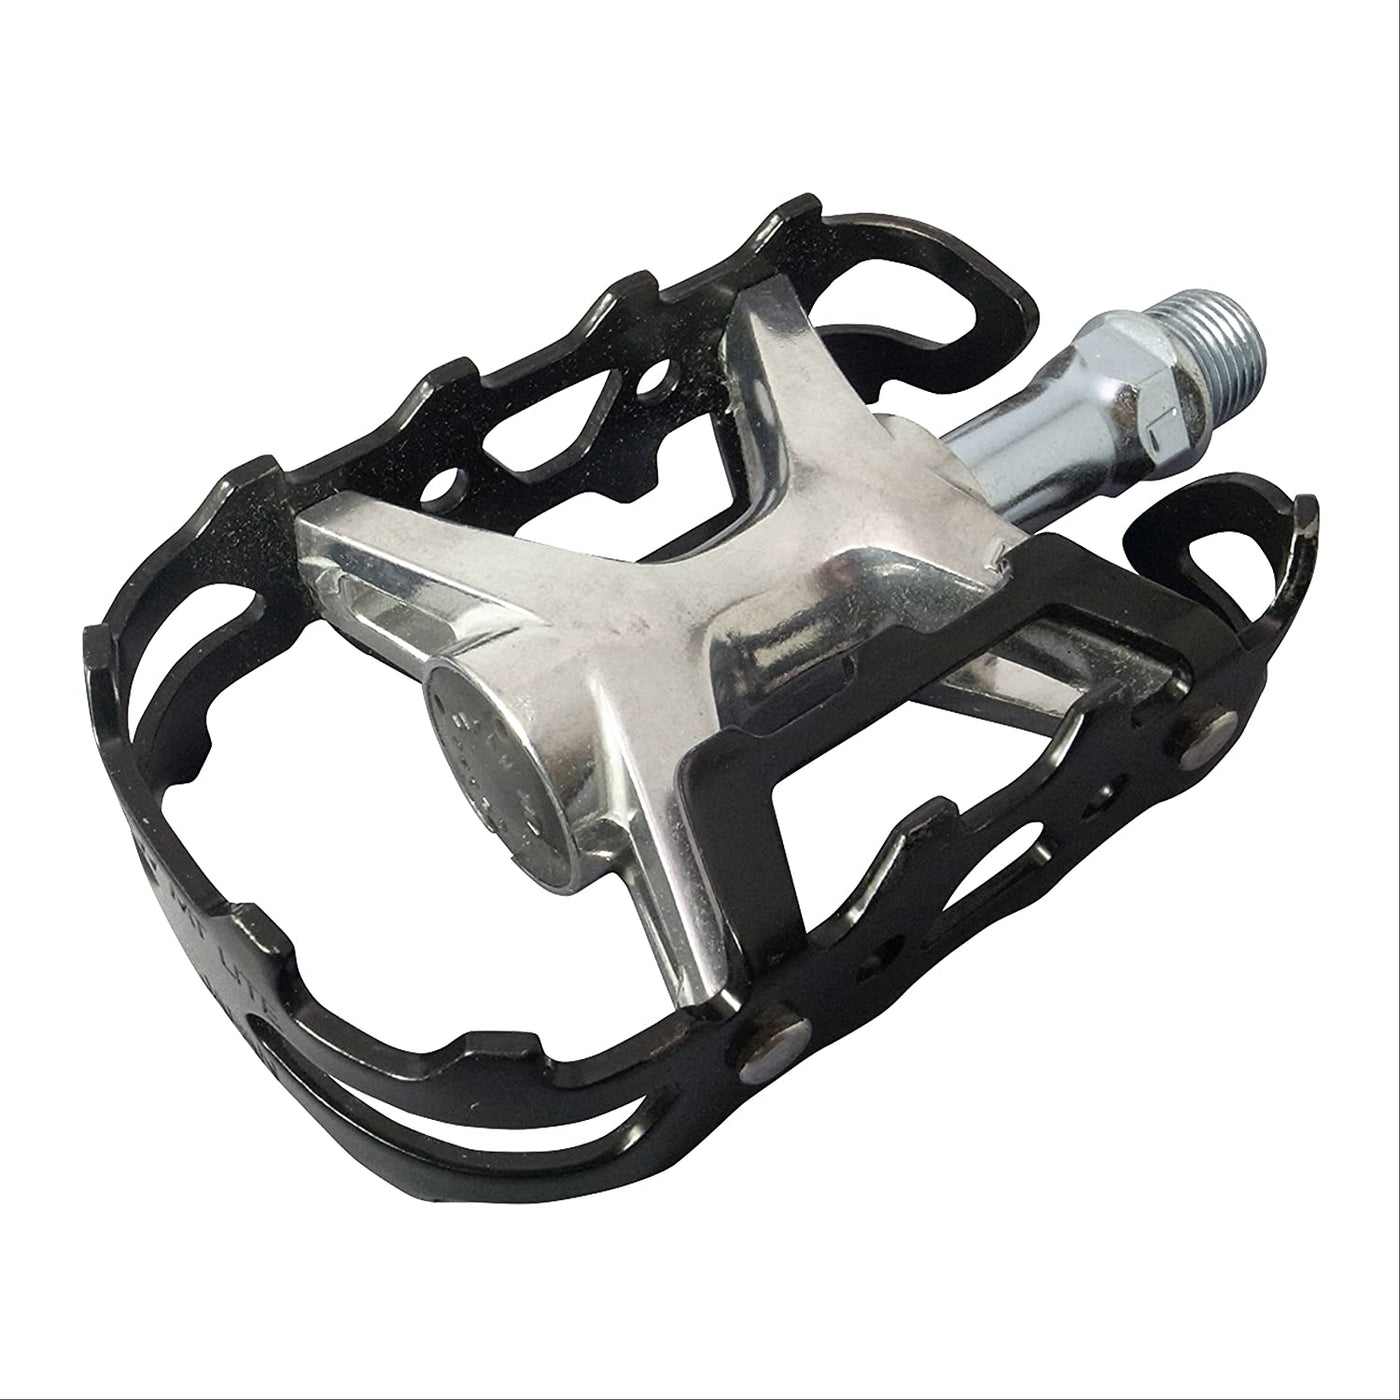 MKS MT-Lite  Pedals - Cyclop.in